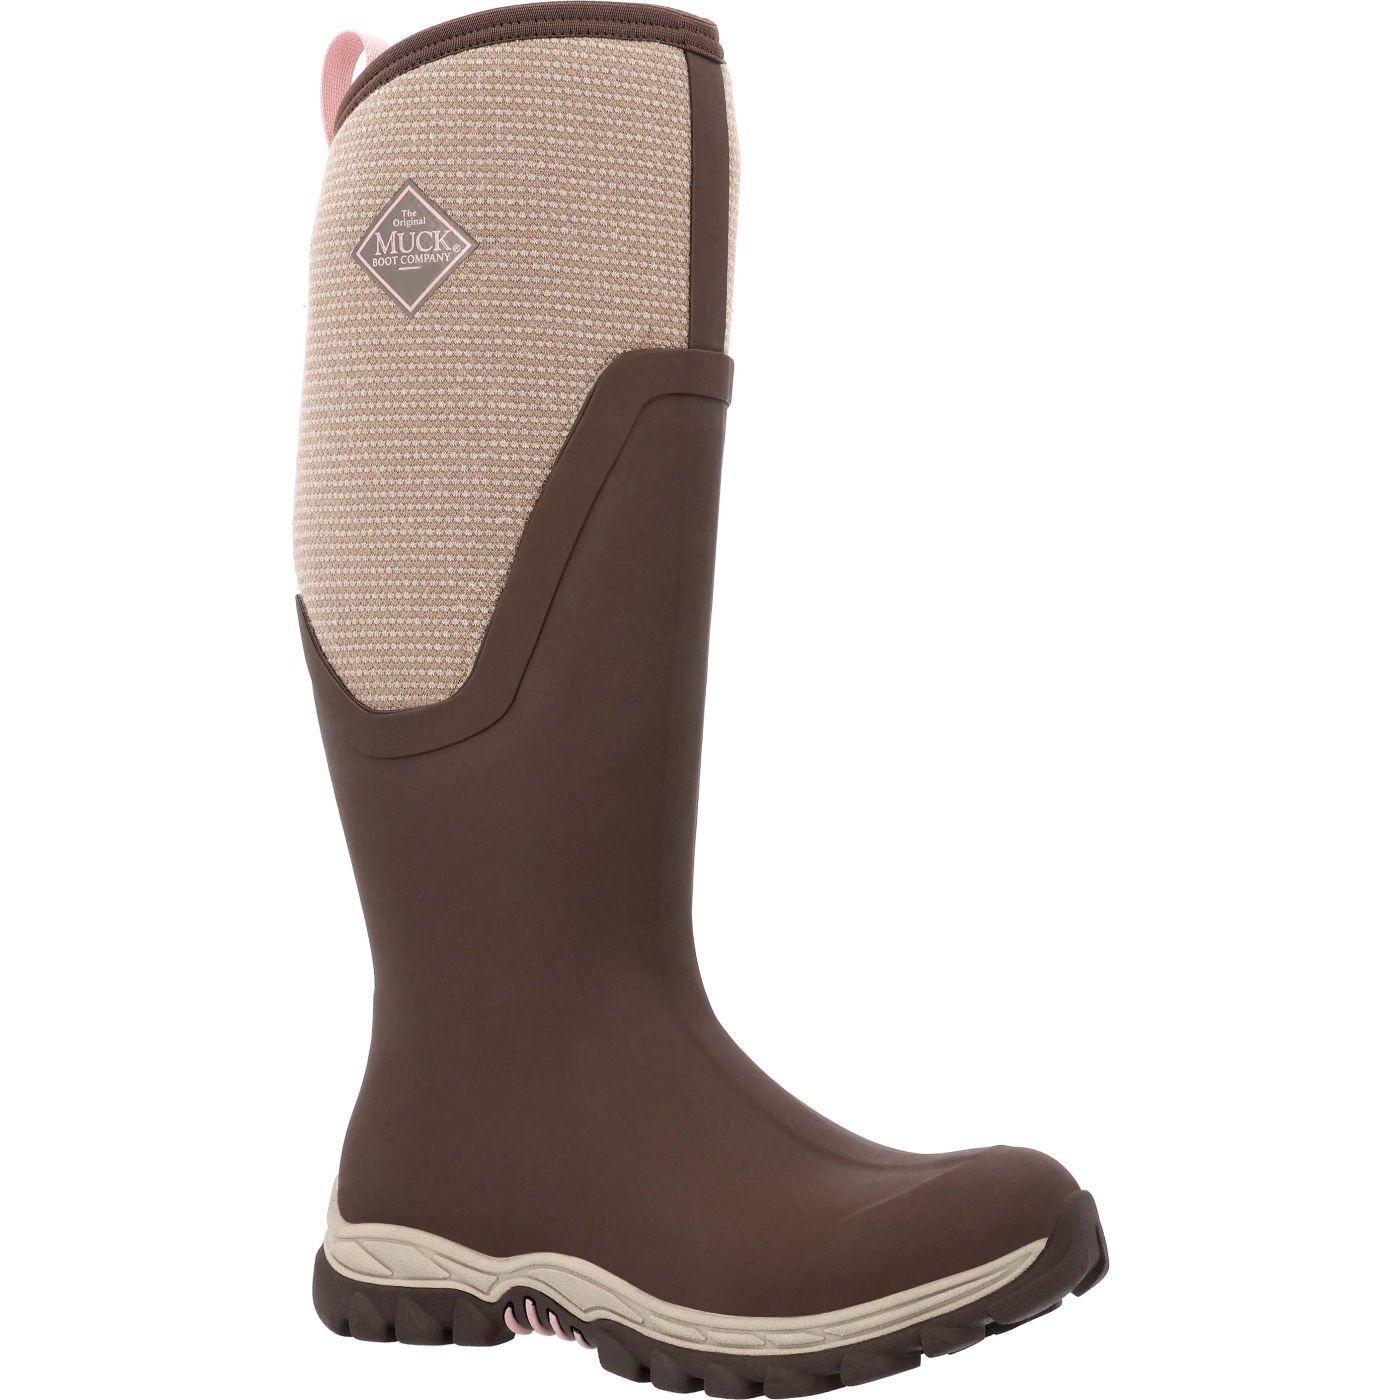 Muck Boots Arctic Ice Tall Wellingtons - Brown 10